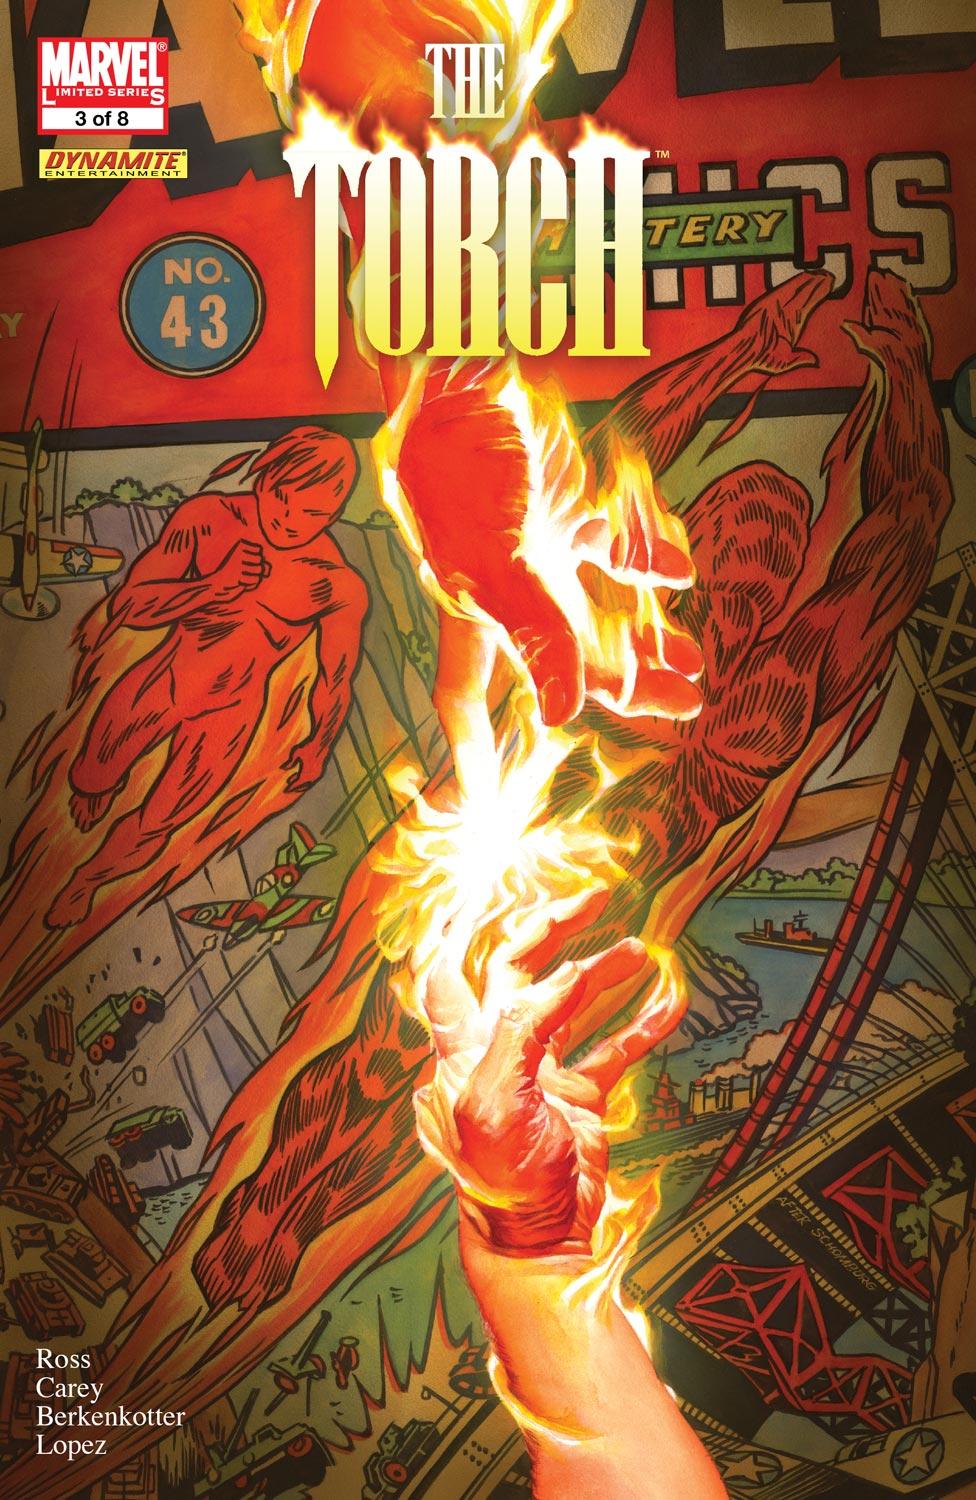 The Torch (2009) #3